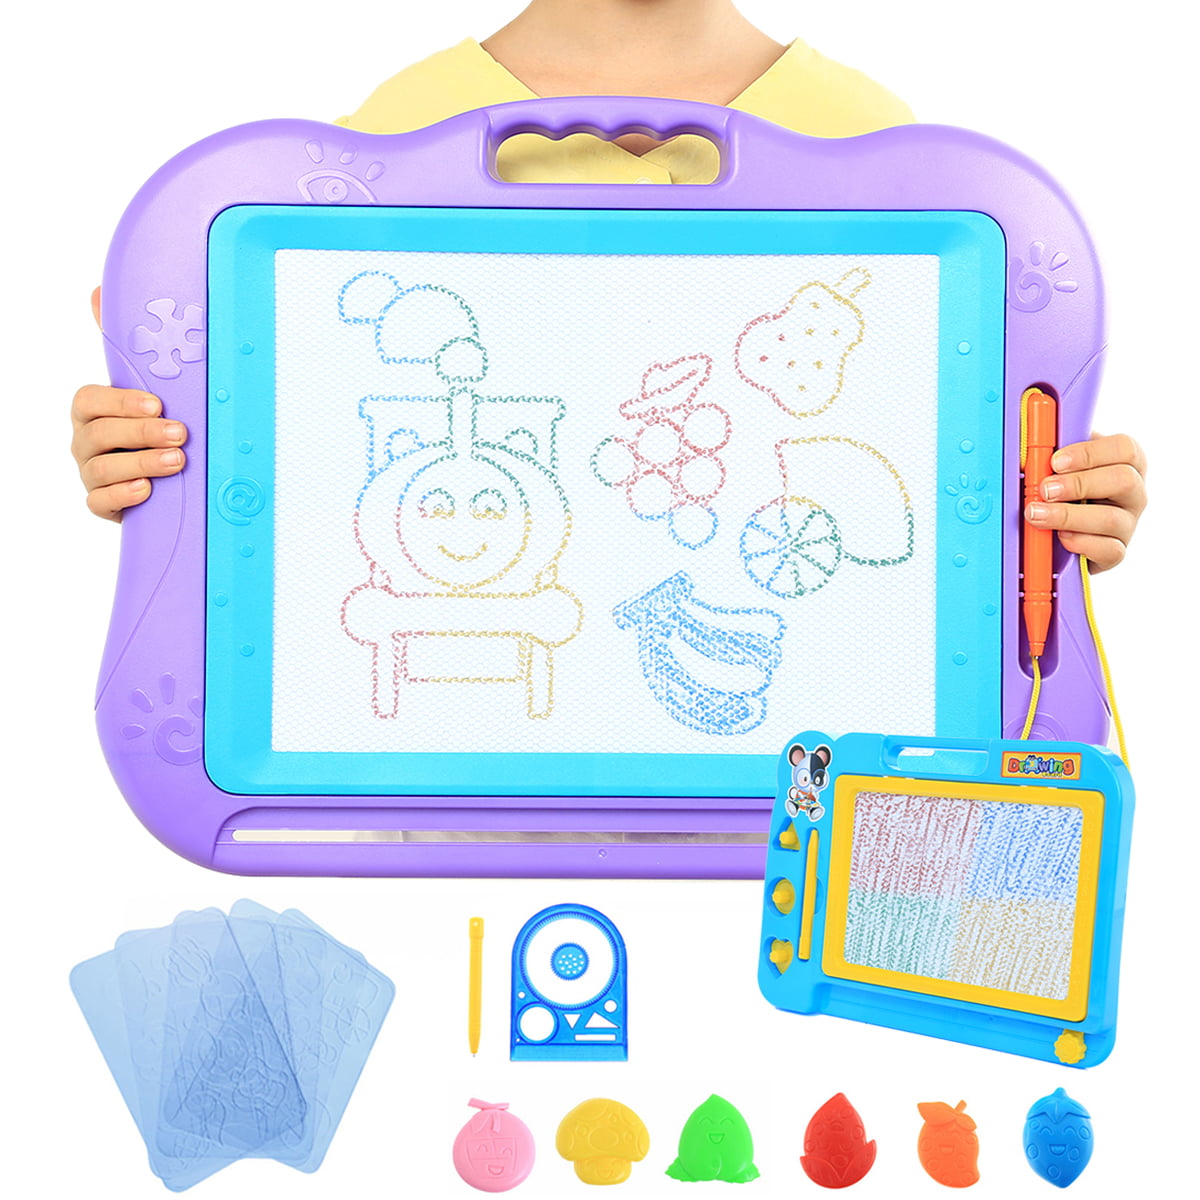 2 Sets Magnetic Drawing Board for Kids, 13" x 17" A4 Size Large Magnet